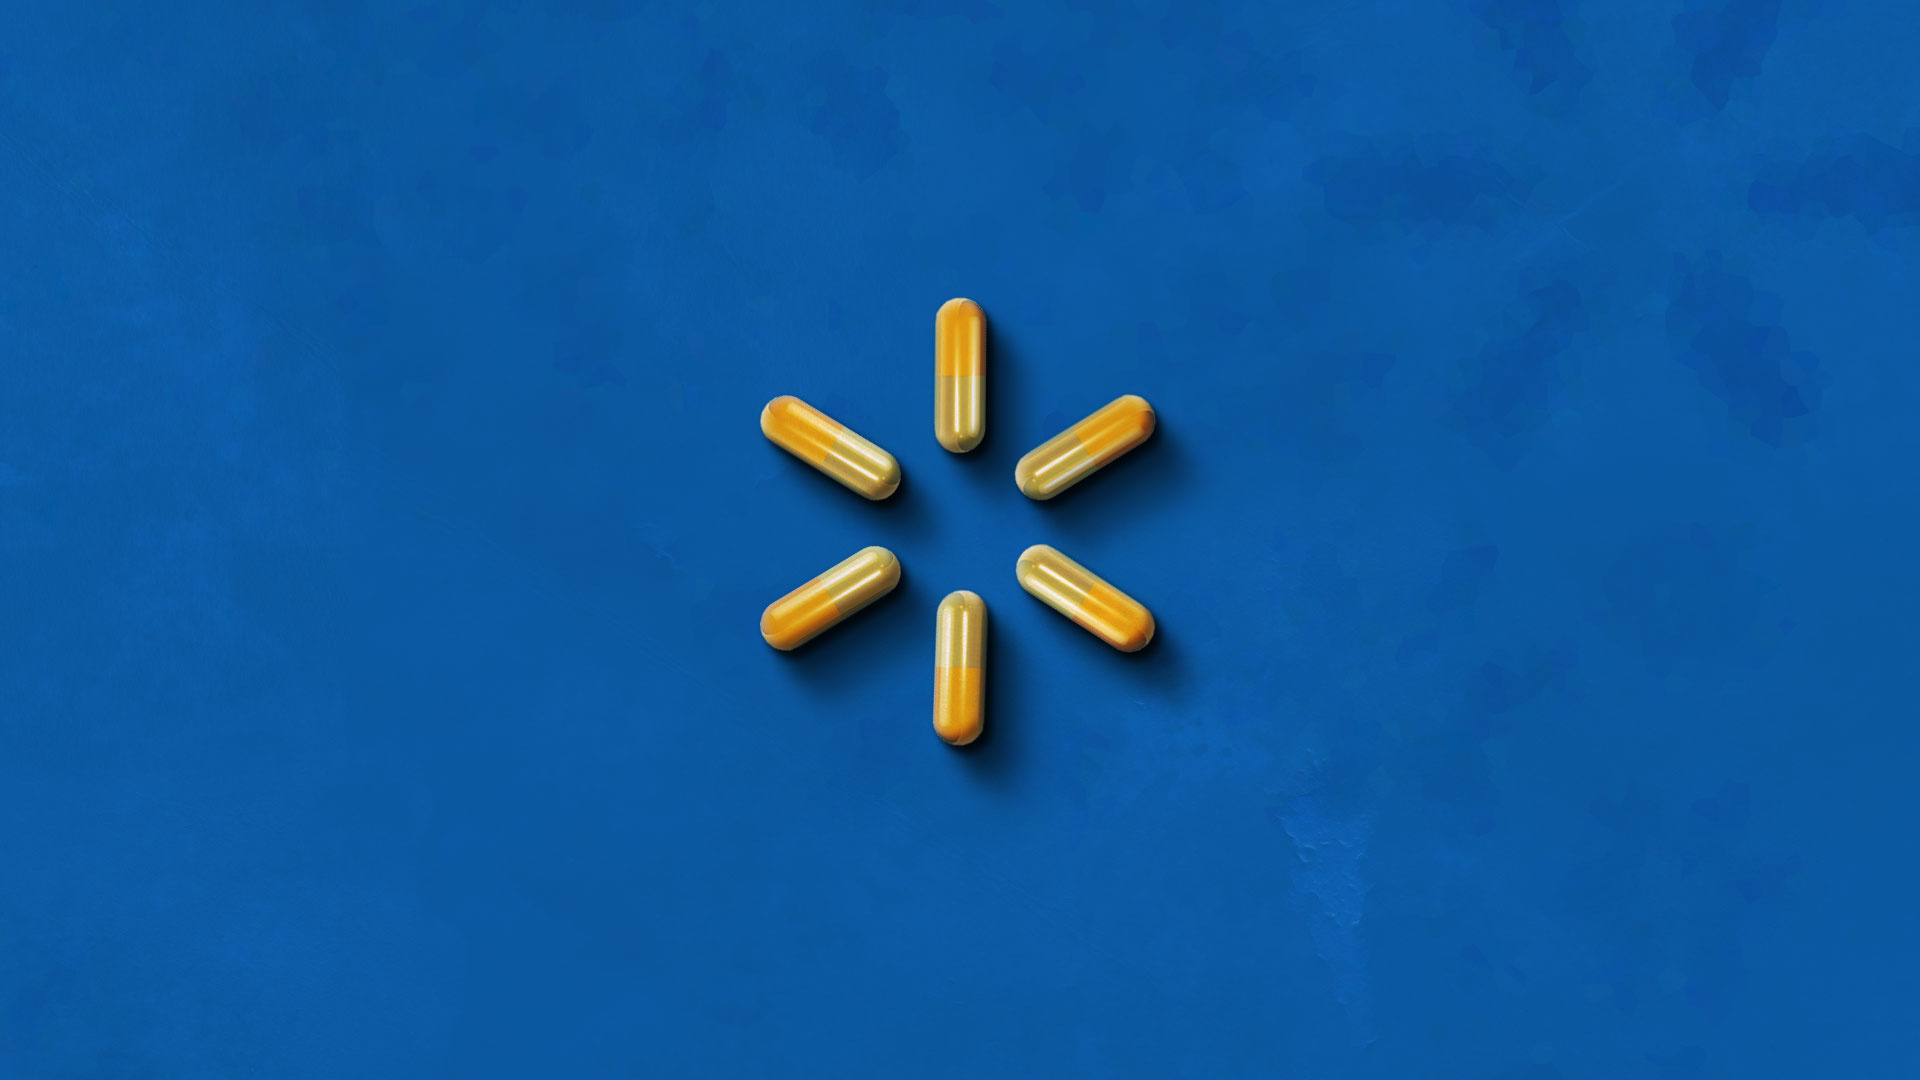 Walmart: A spark, A symbol of inspiration led Sam Walton to open the first store, 1962. 1920x1080 Full HD Background.